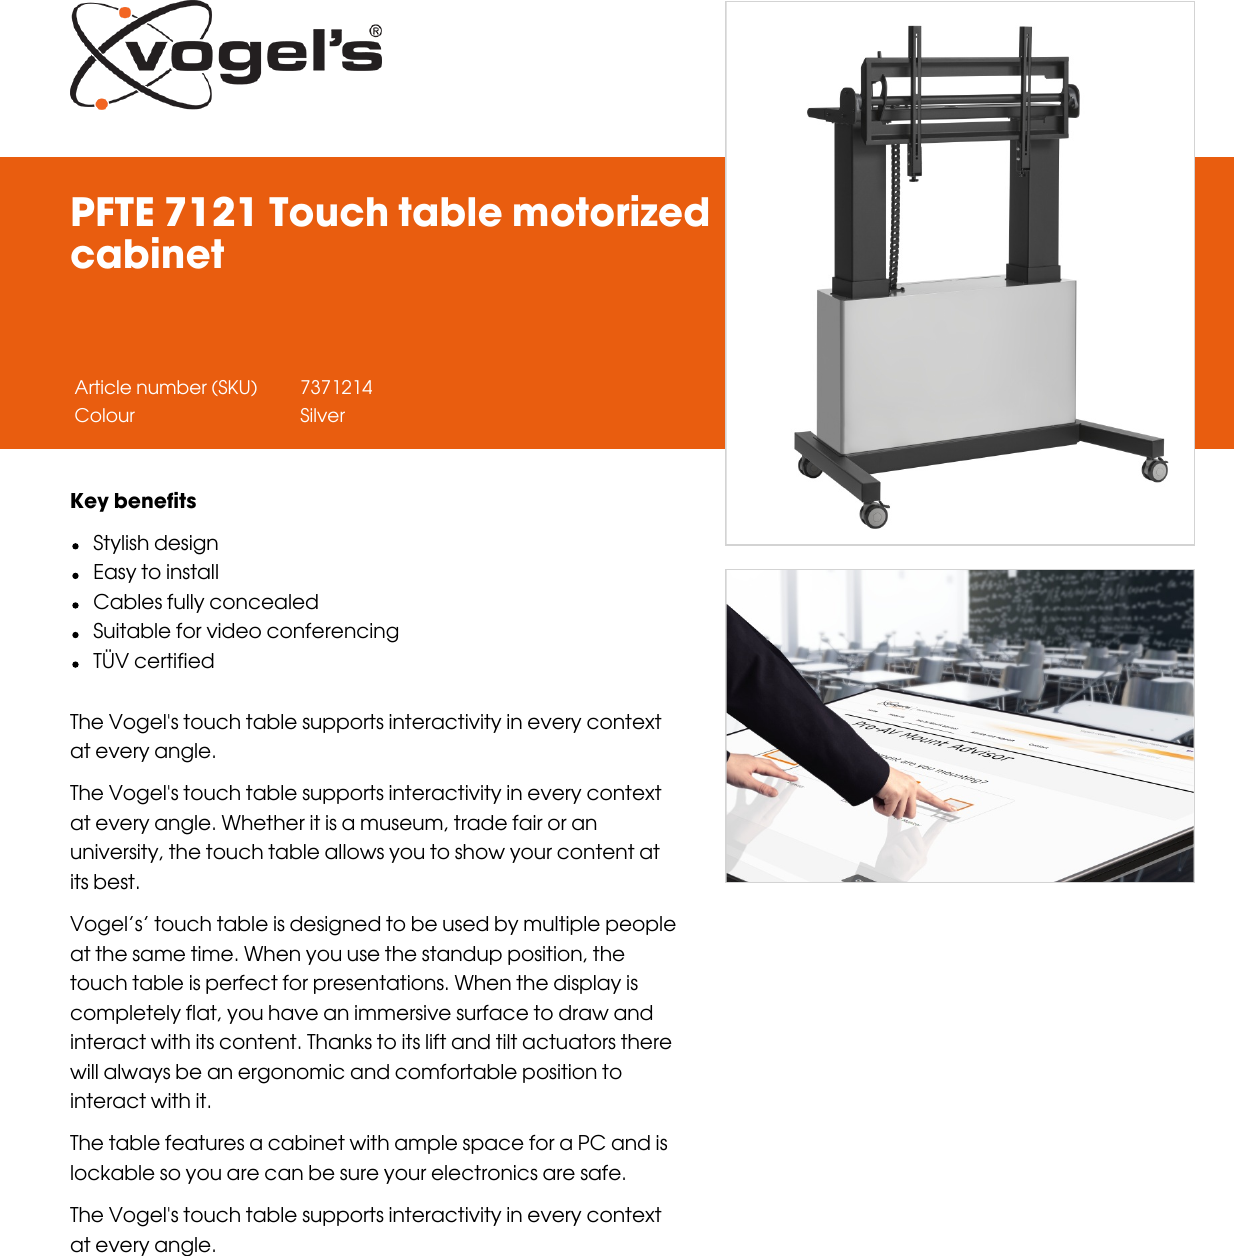 Page 1 of 4 - Leaflet Version 4.0  PFTE-7121-Touch-table-motorized-cabinet-5391-en